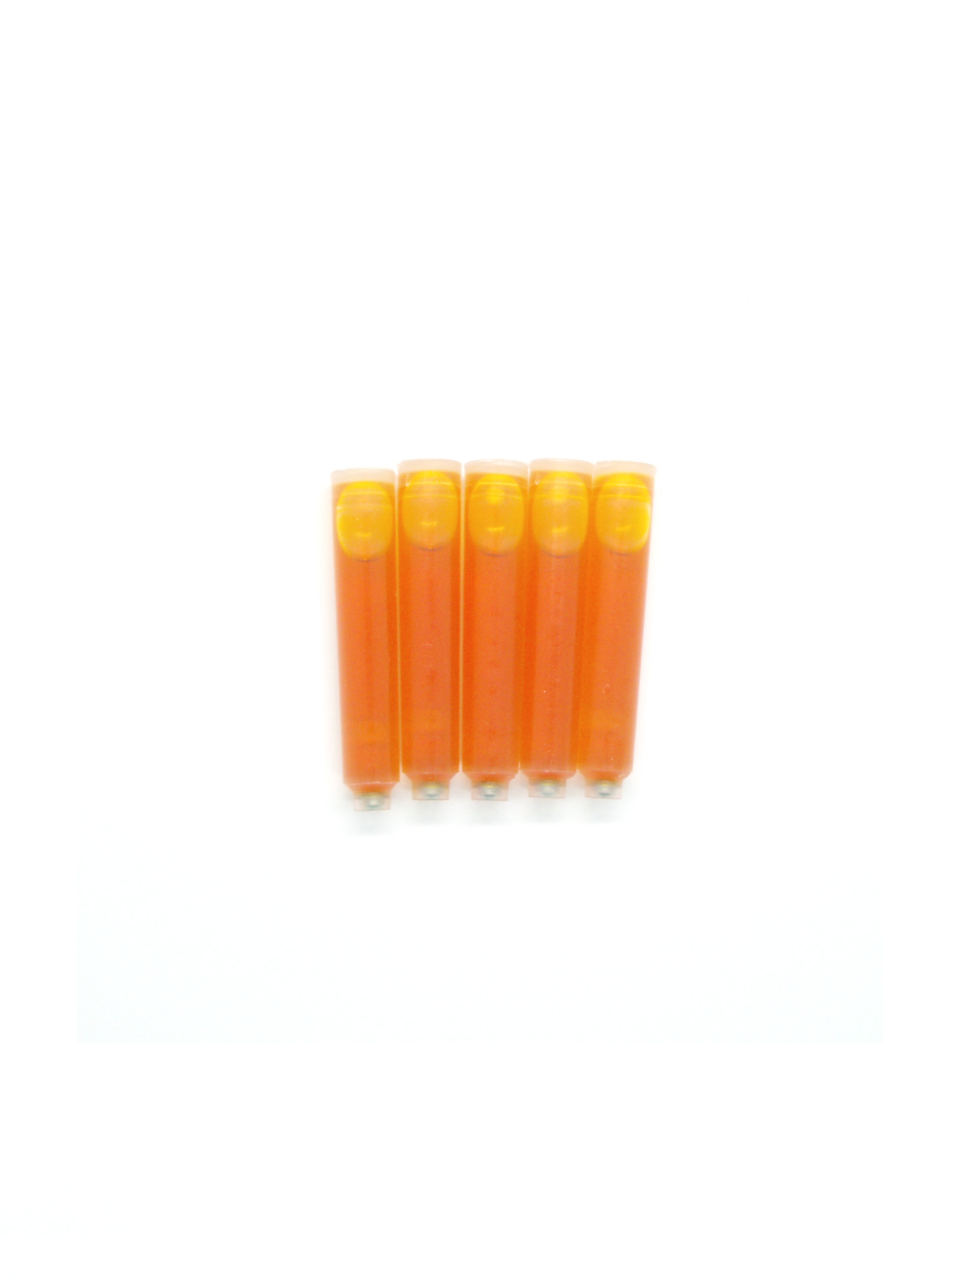 PenConverter Ink Cartridges For Yookers Fountain Pens (Yellow)